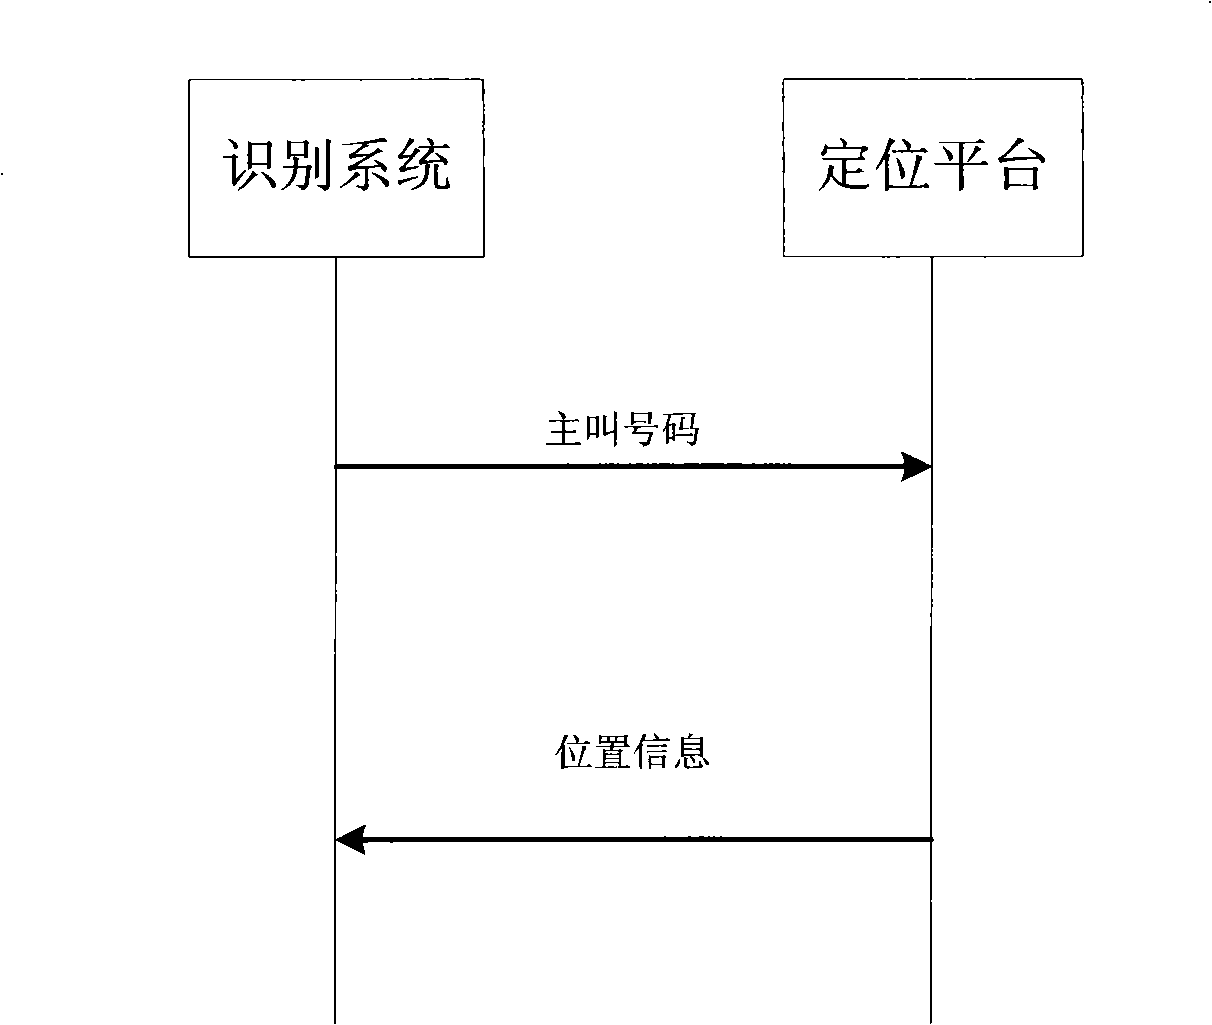 Rubbish short message recognition system and method based on calling number location and transmitted content